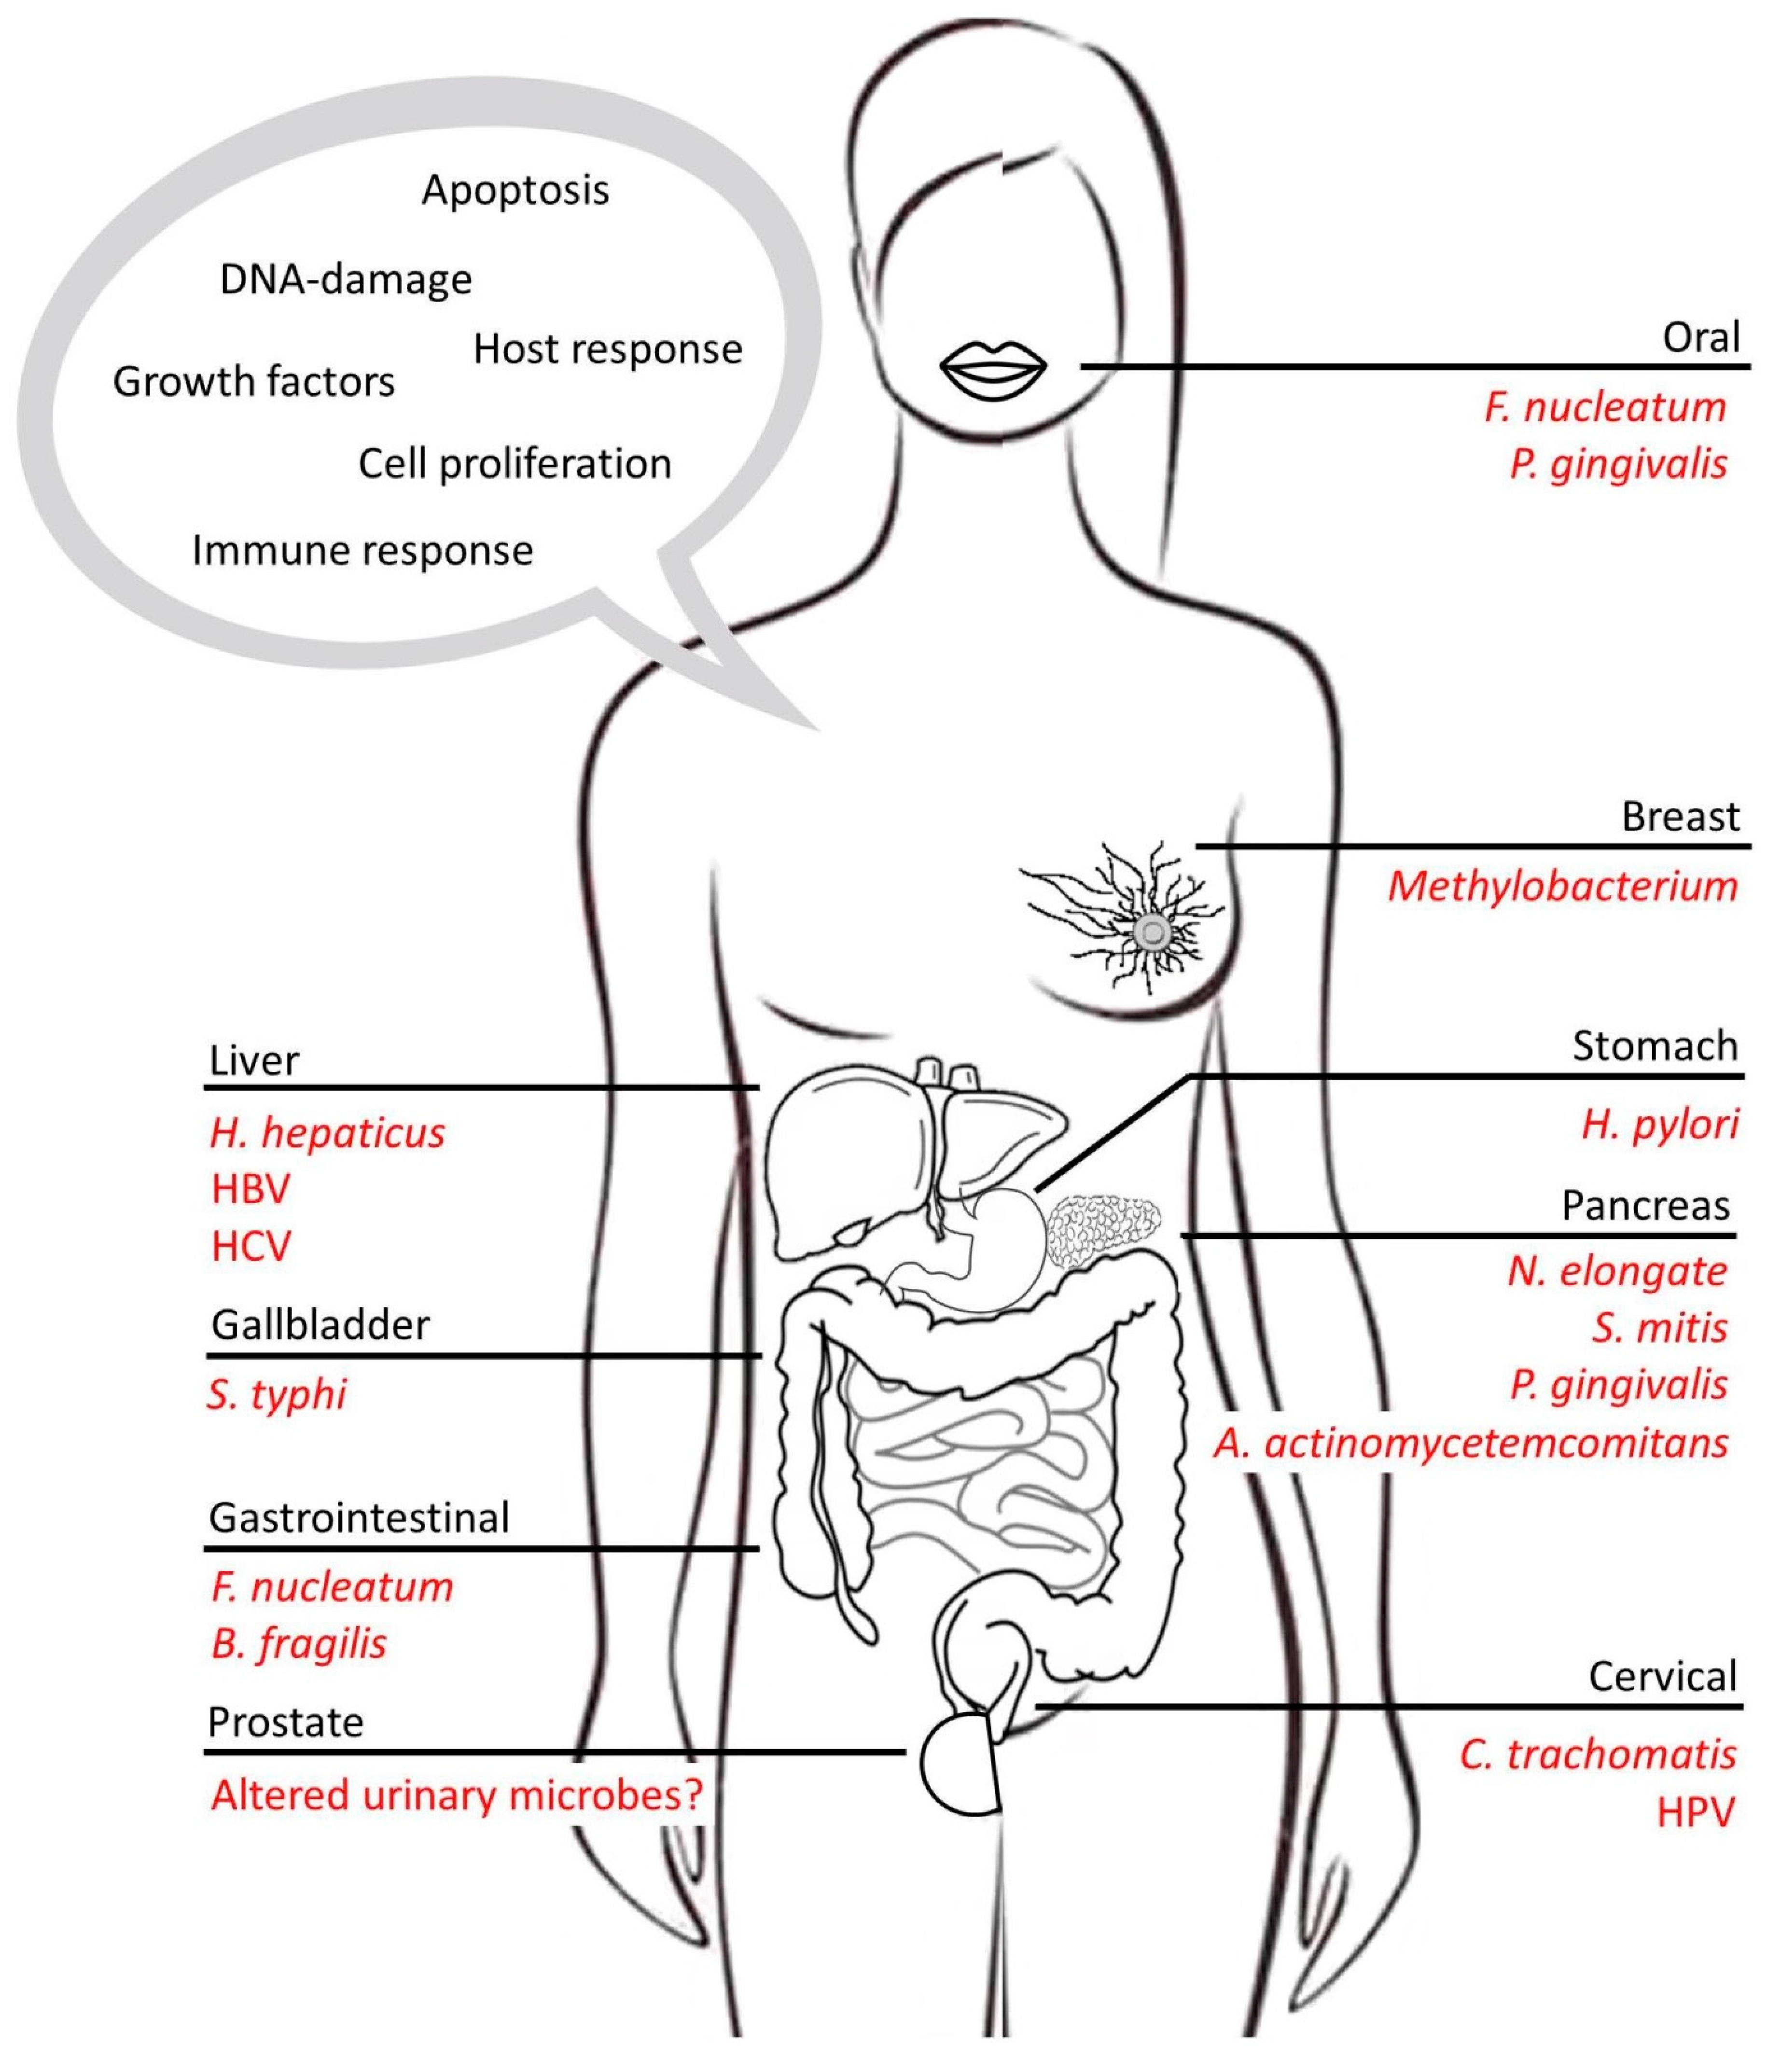 Cancers Free Full-Text | The Complex Interplay between Chronic Inflammation, the Microbiome, and Understanding Disease Progression and What We Can Do to Prevent It